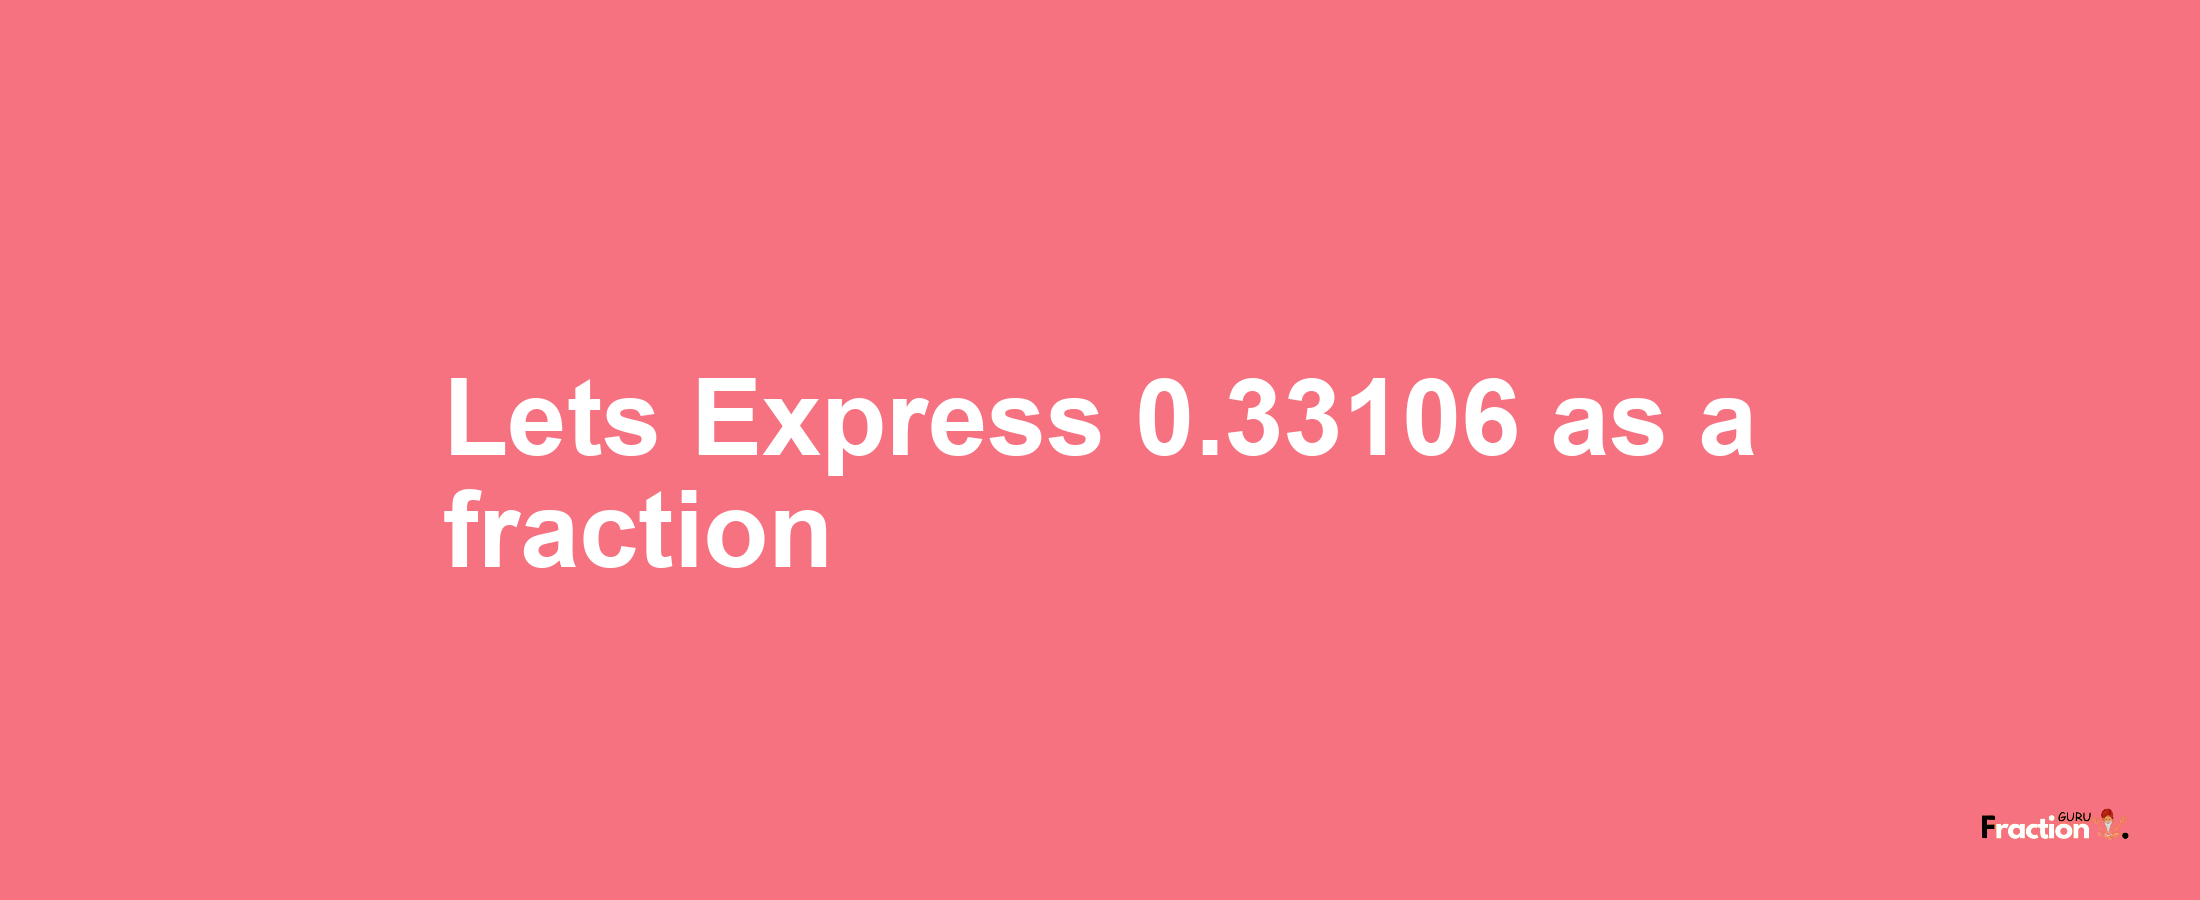 Lets Express 0.33106 as afraction